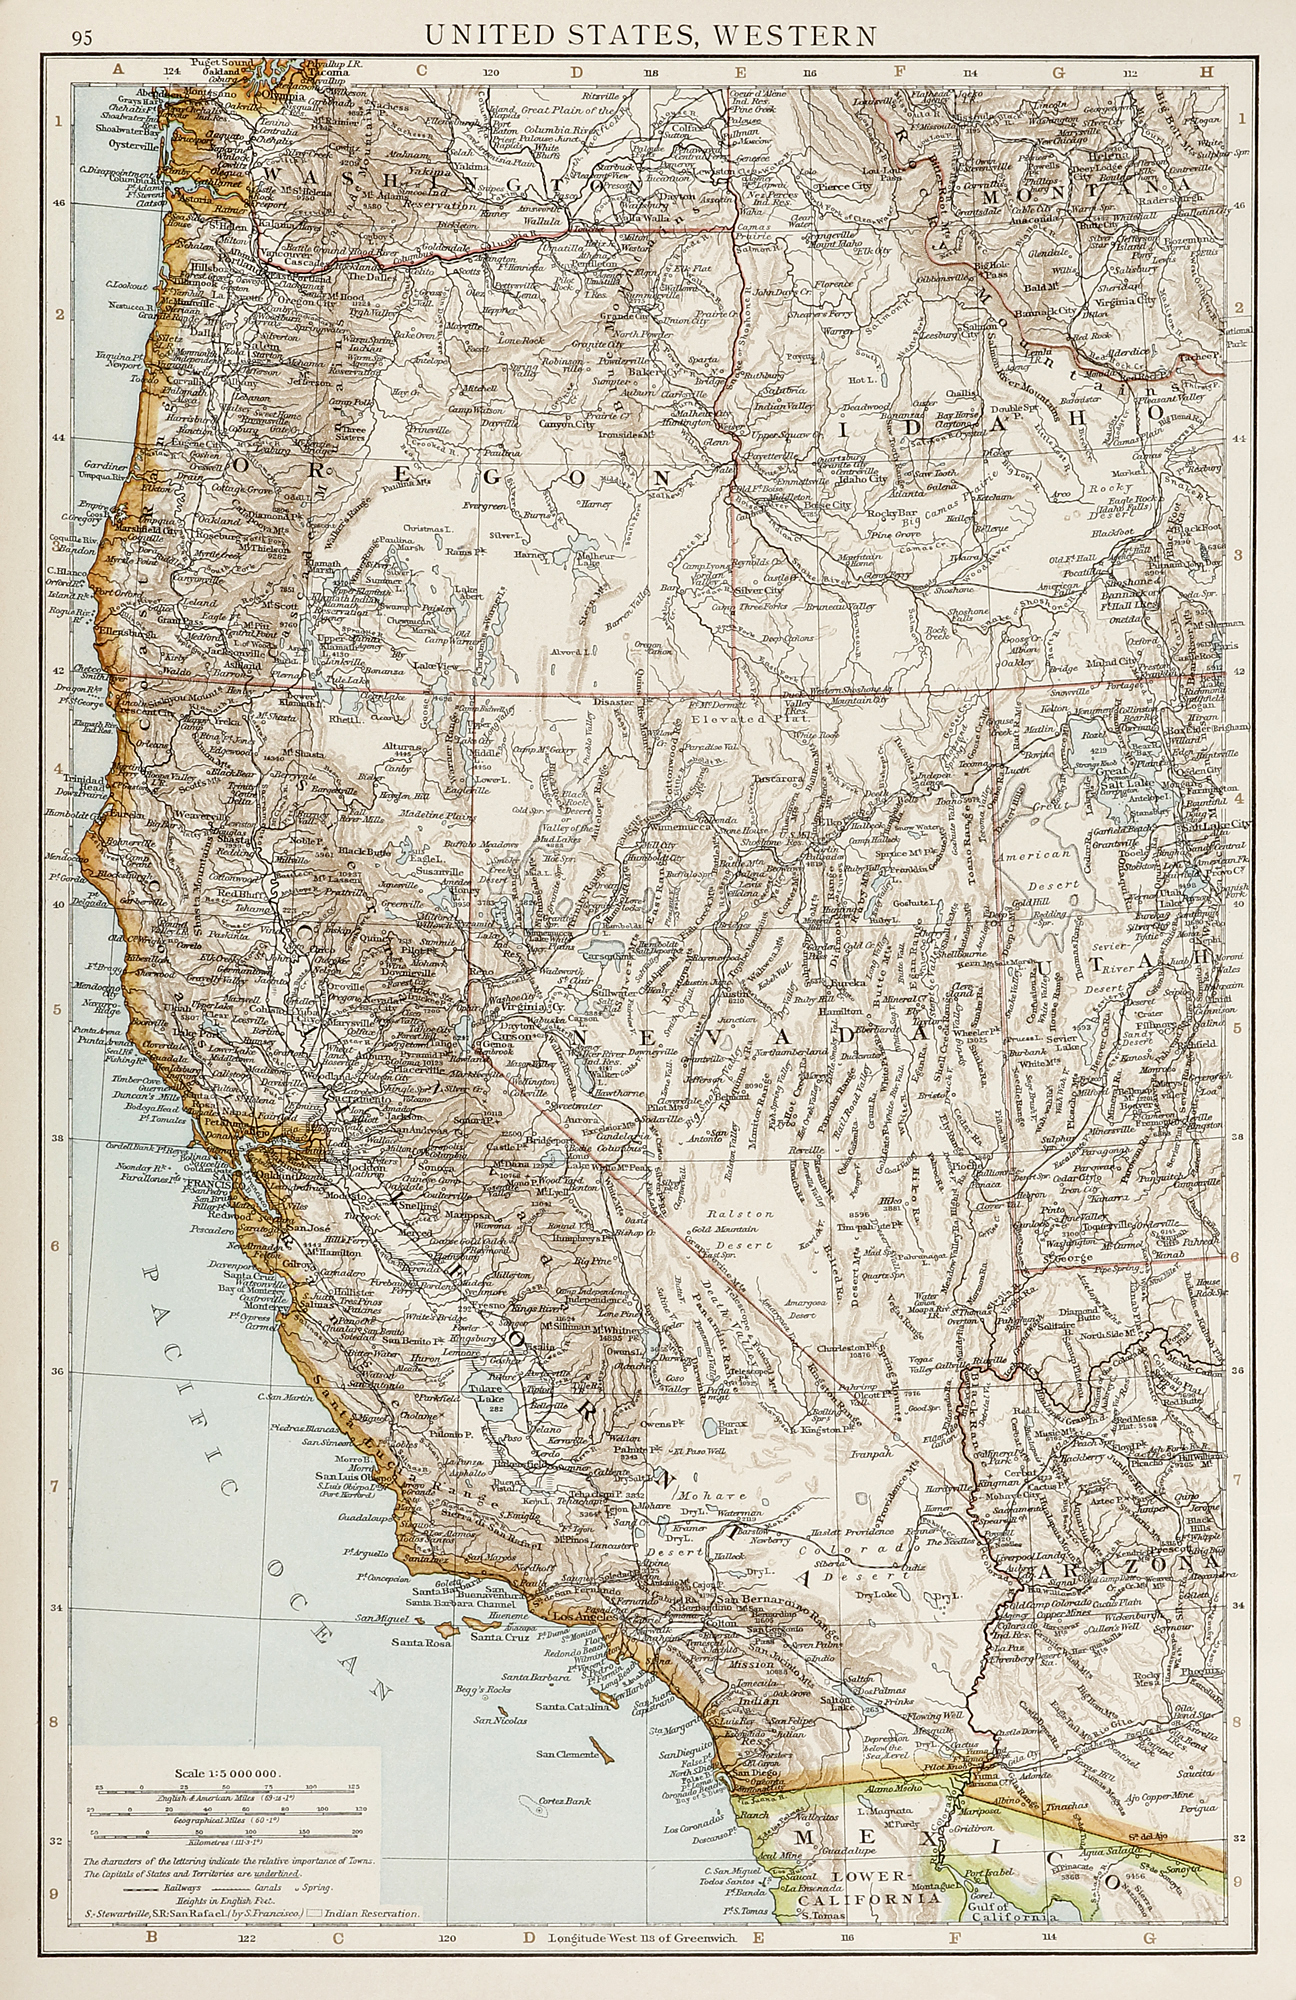 United States, Western - Antique Map from 1895